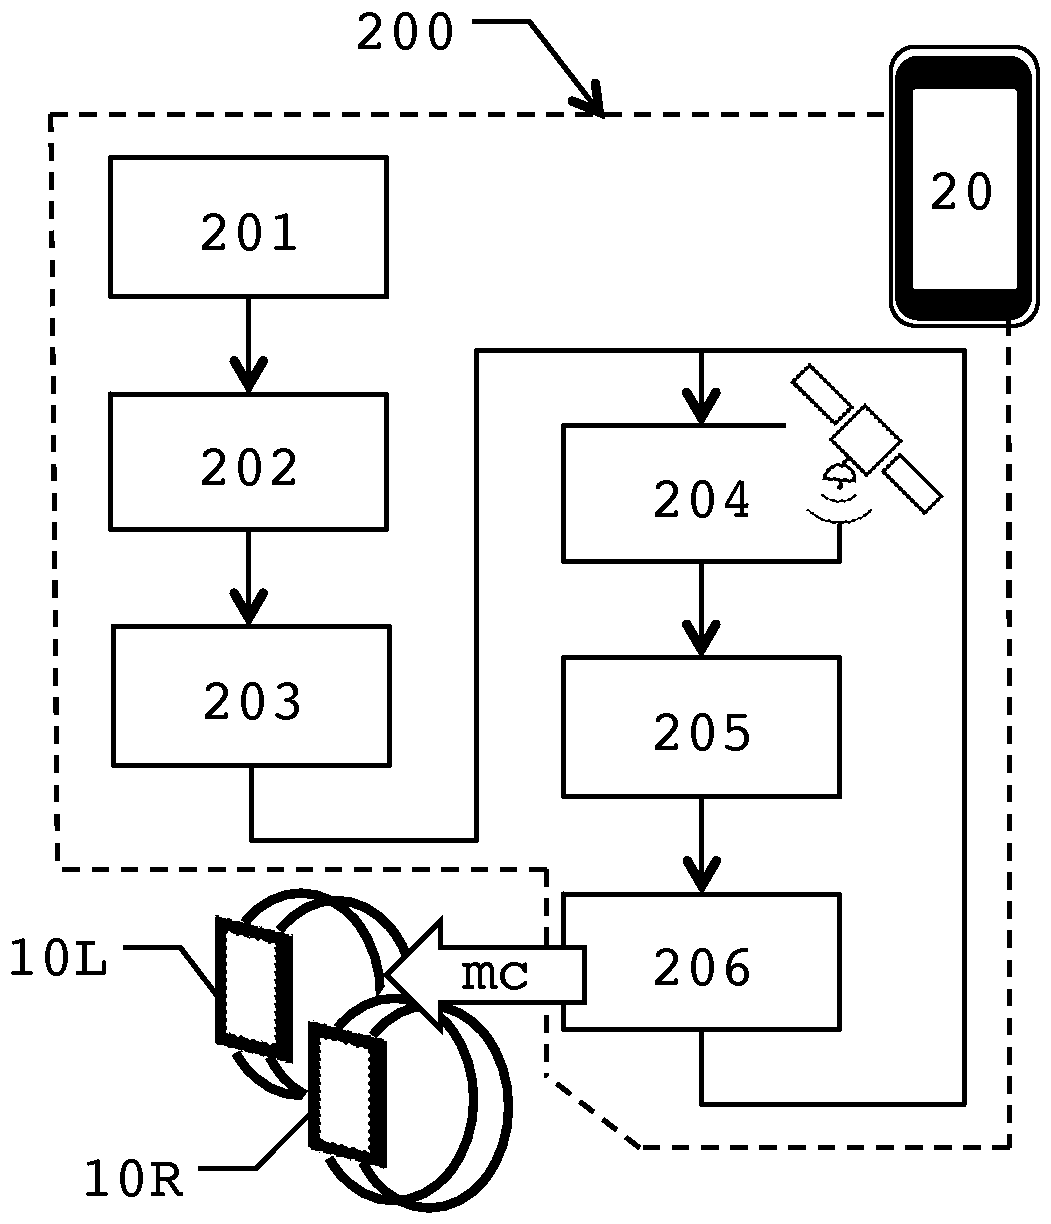 System for aiding navigation using visual and lateralized interfaces